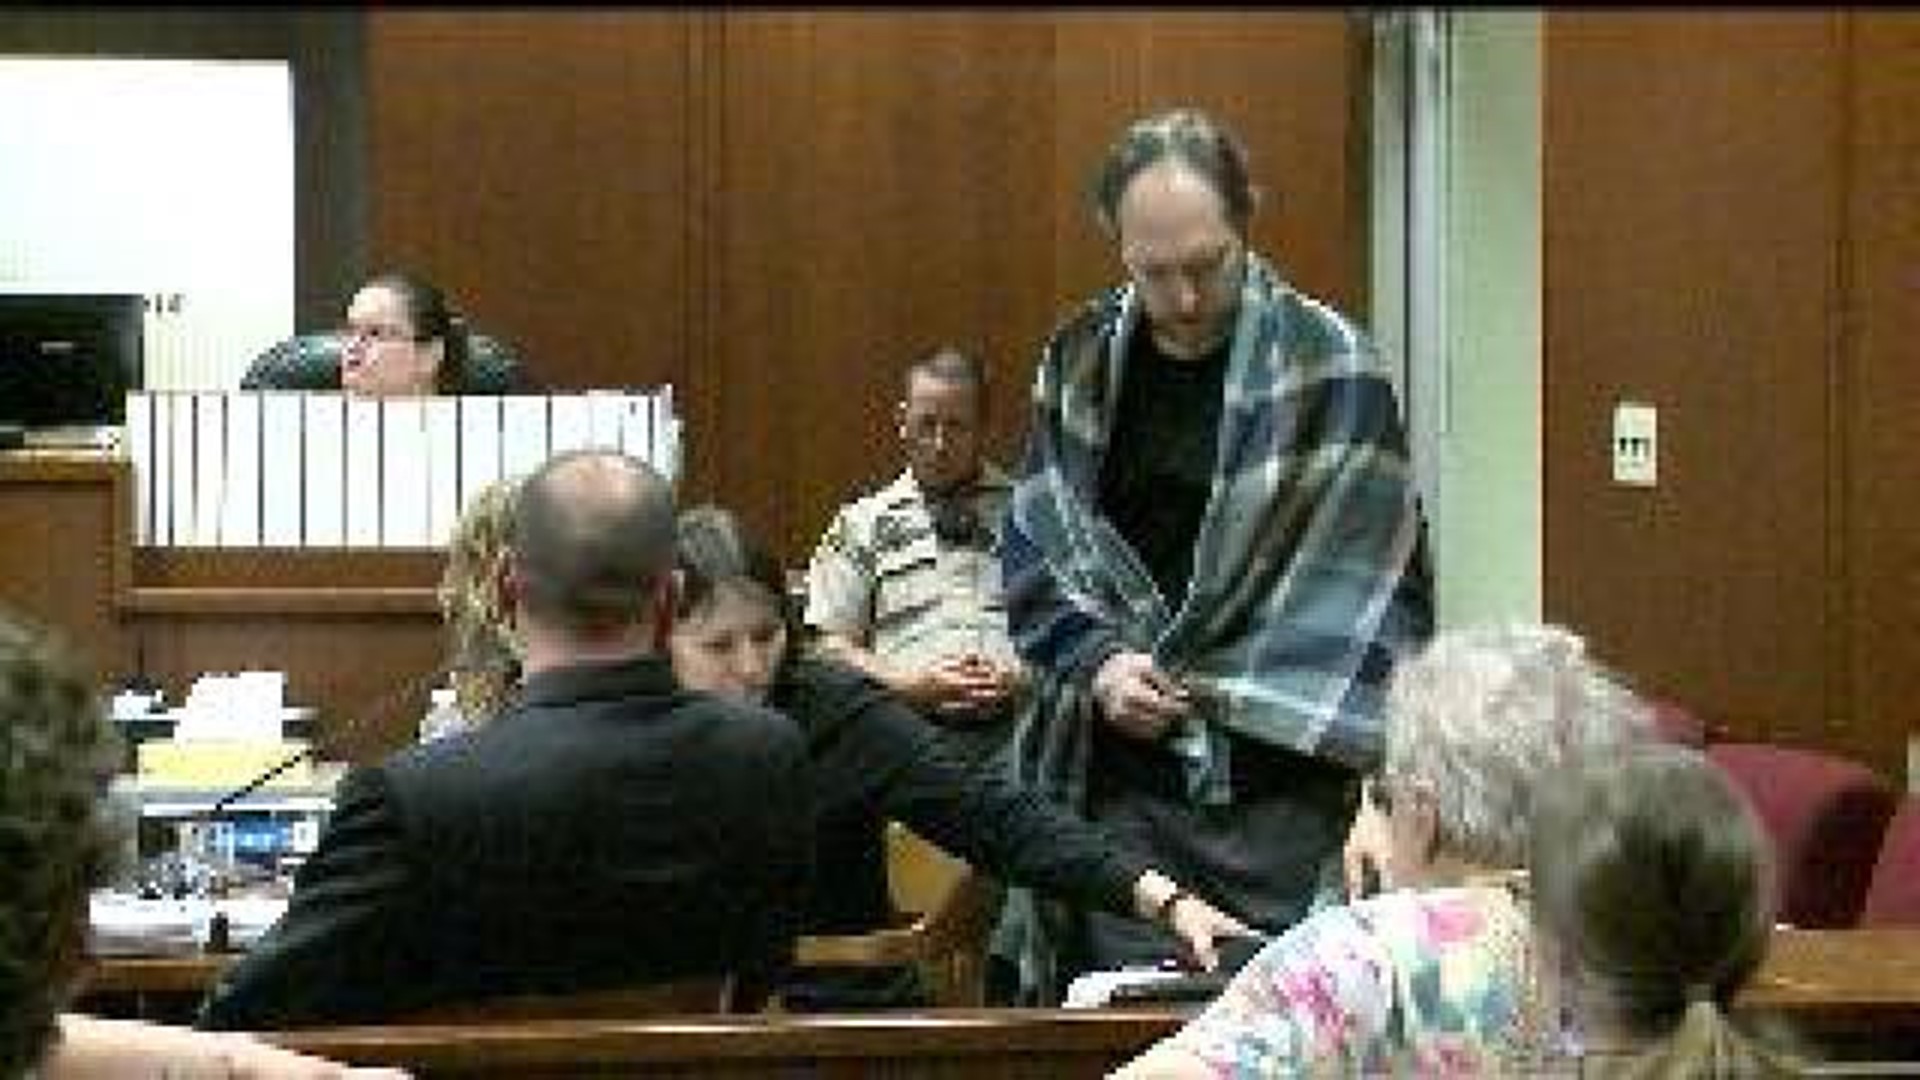 Guilty verdict for family claiming medical marijuana use